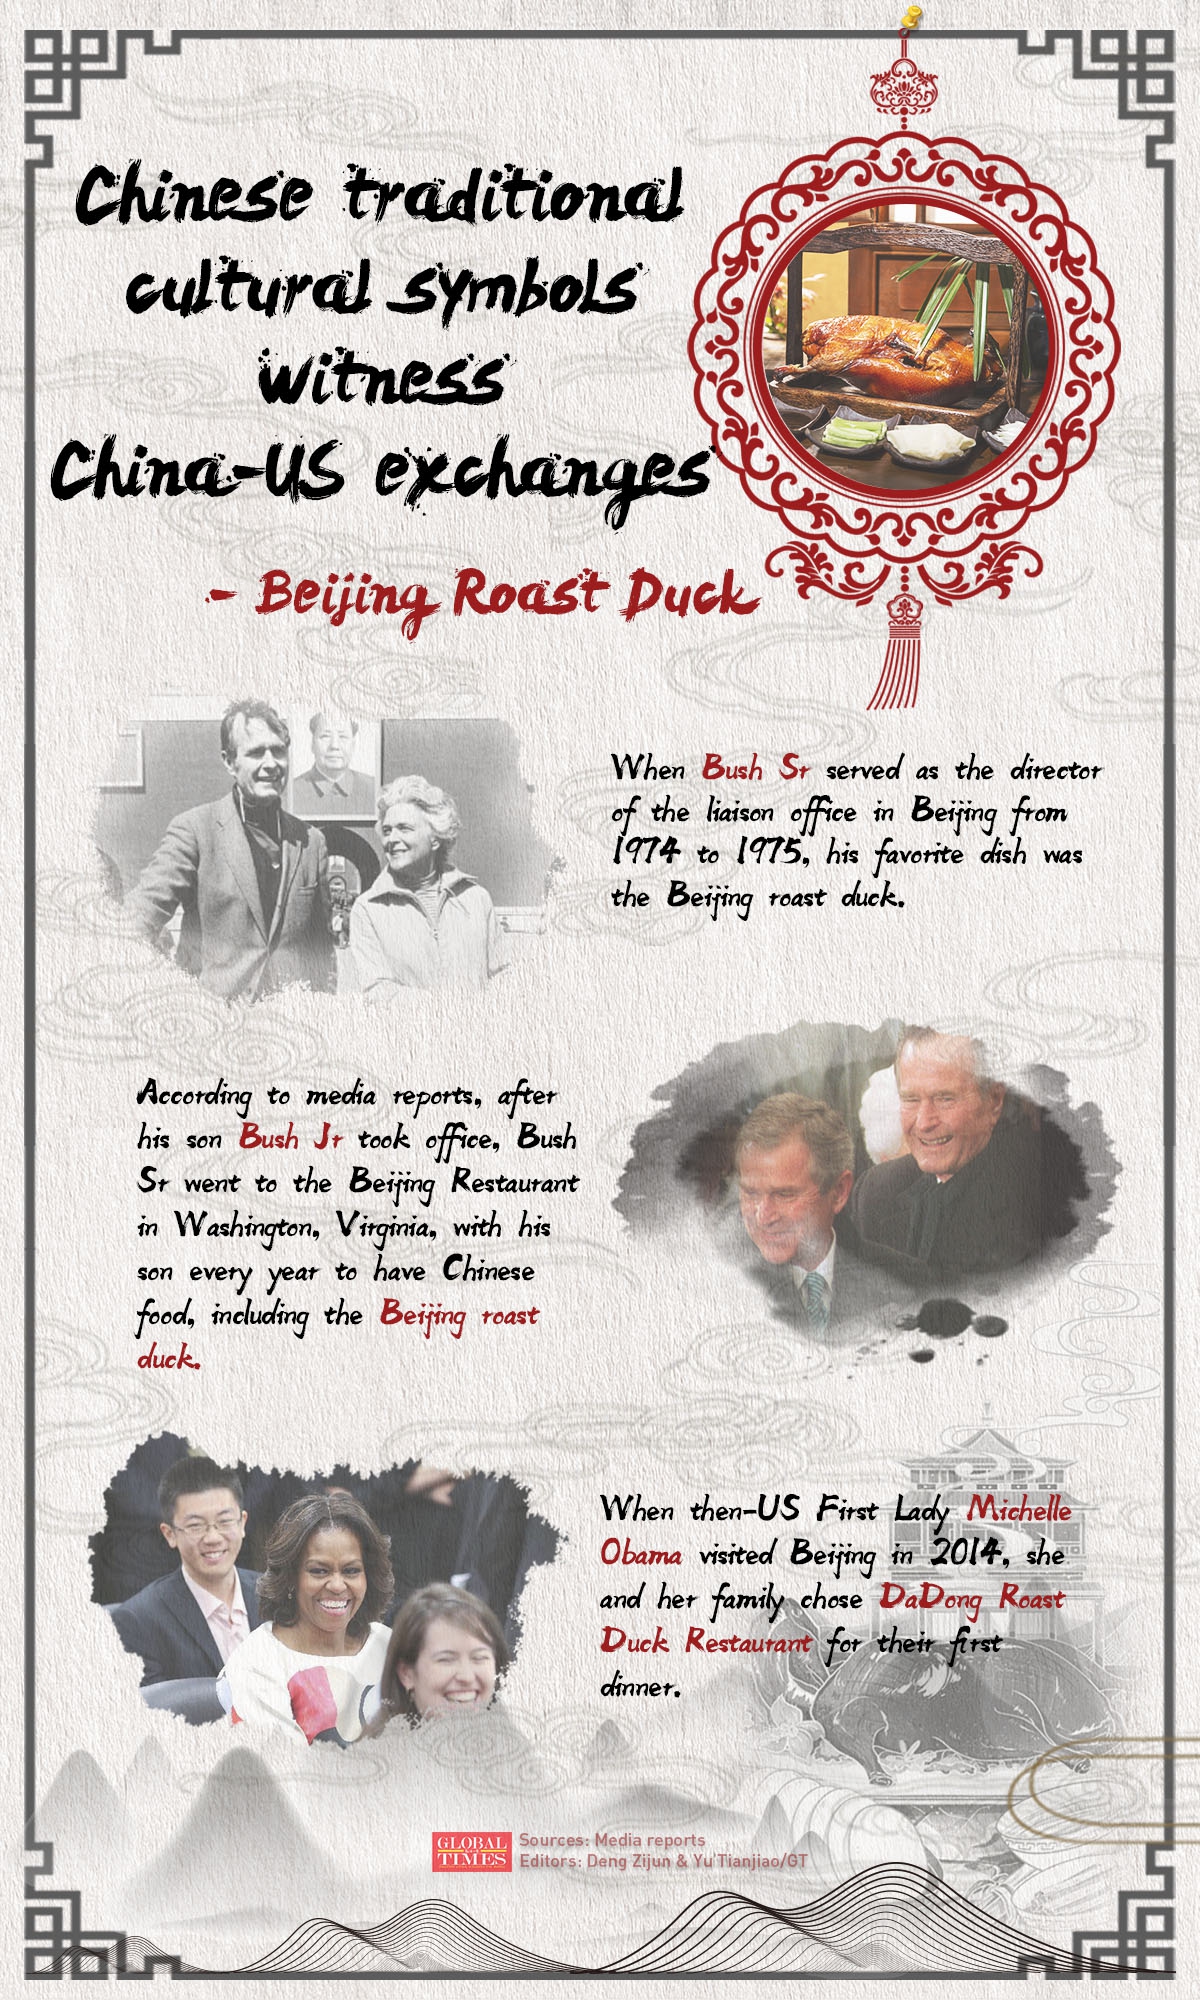 During Nixon's 1972 visit to China, the then US president visited the Great Wall and the Forbidden City. Beijing roast duck was served at the banquet and two giant pandas were given to the US as gift. Chinese cultural symbols have seen China-US exchanges ever since.